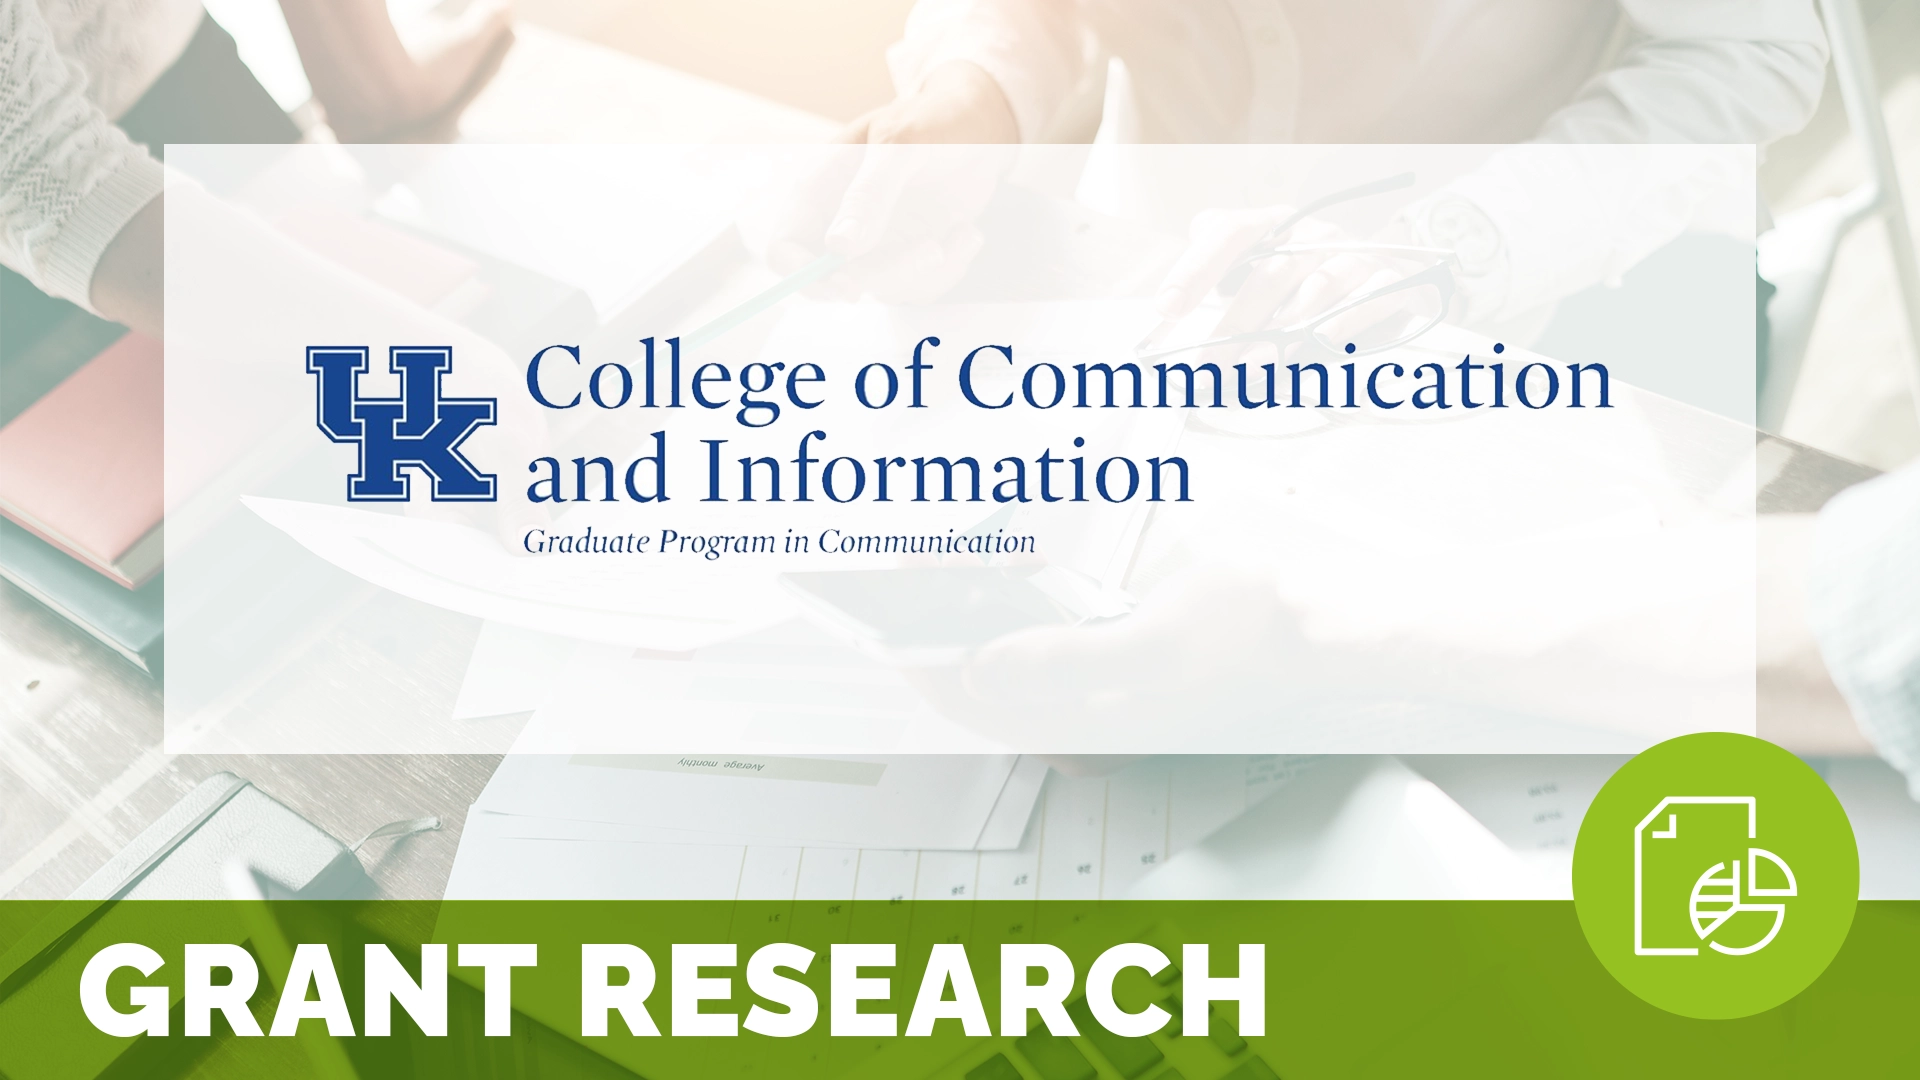 Promotional image for the University of Kentucky's College of Communication and Information, featuring their Graduate Program in Communication. The university's logo is at the top, with the institution's name and program title below in bold, capitalized text. The phrase 'GRANT RESEARCH' is prominently displayed in a circle at the bottom. The background is a blurred photo of a research environment with a person working at a desk with papers and a laptop.